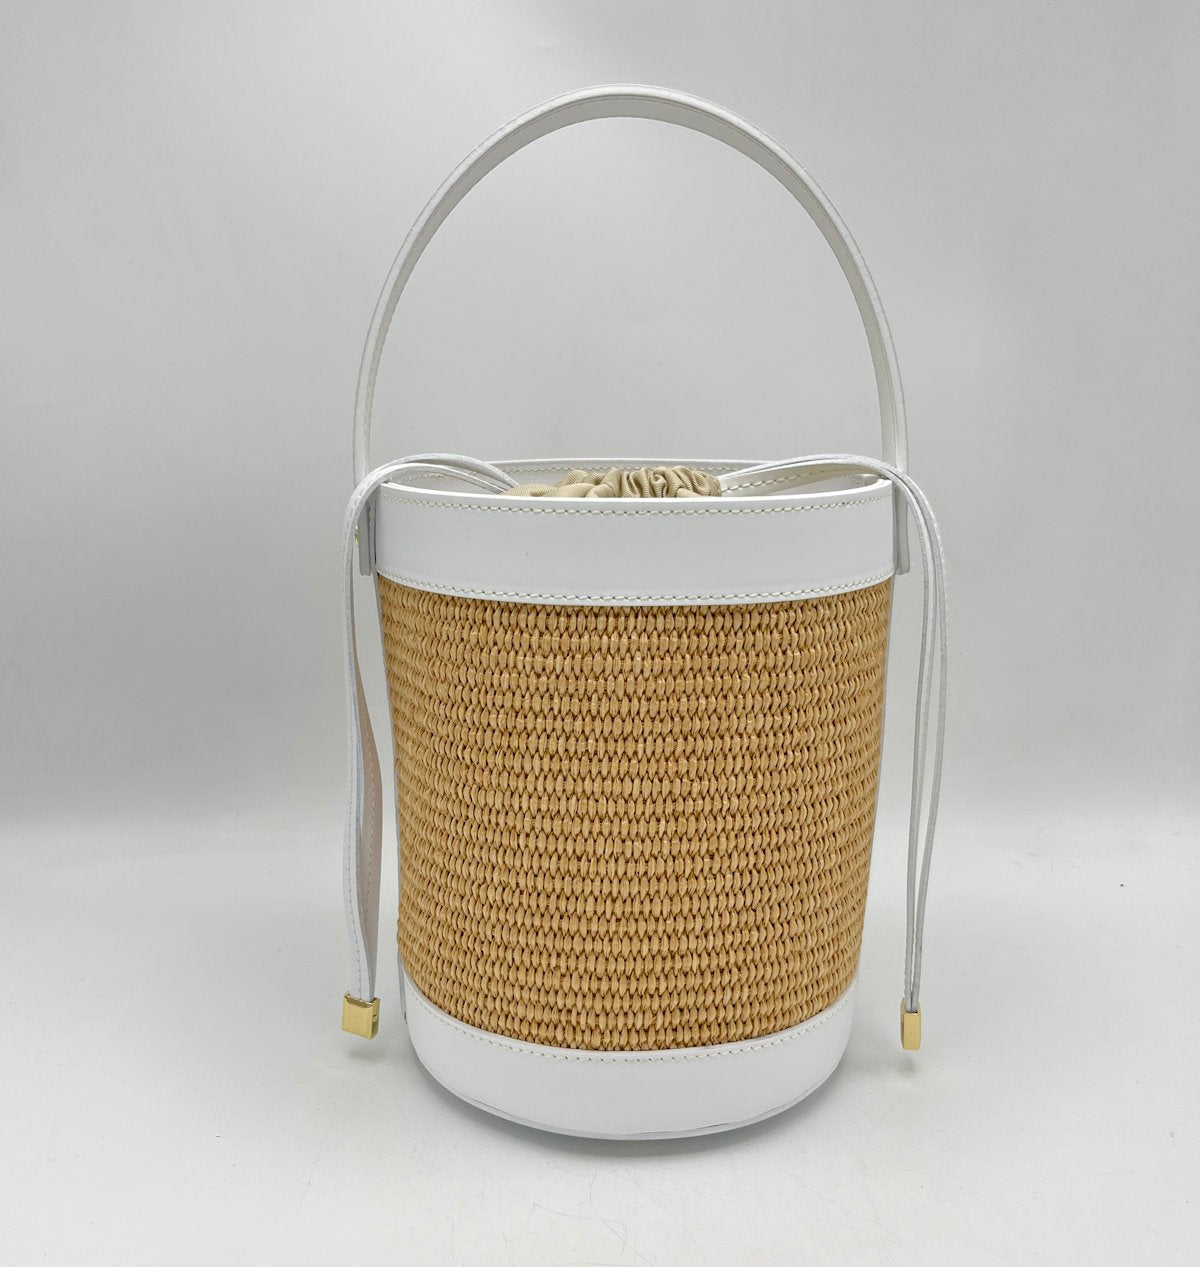 Genuine leather and Straw bucket bag, Made in Italy, medium, art. 112470